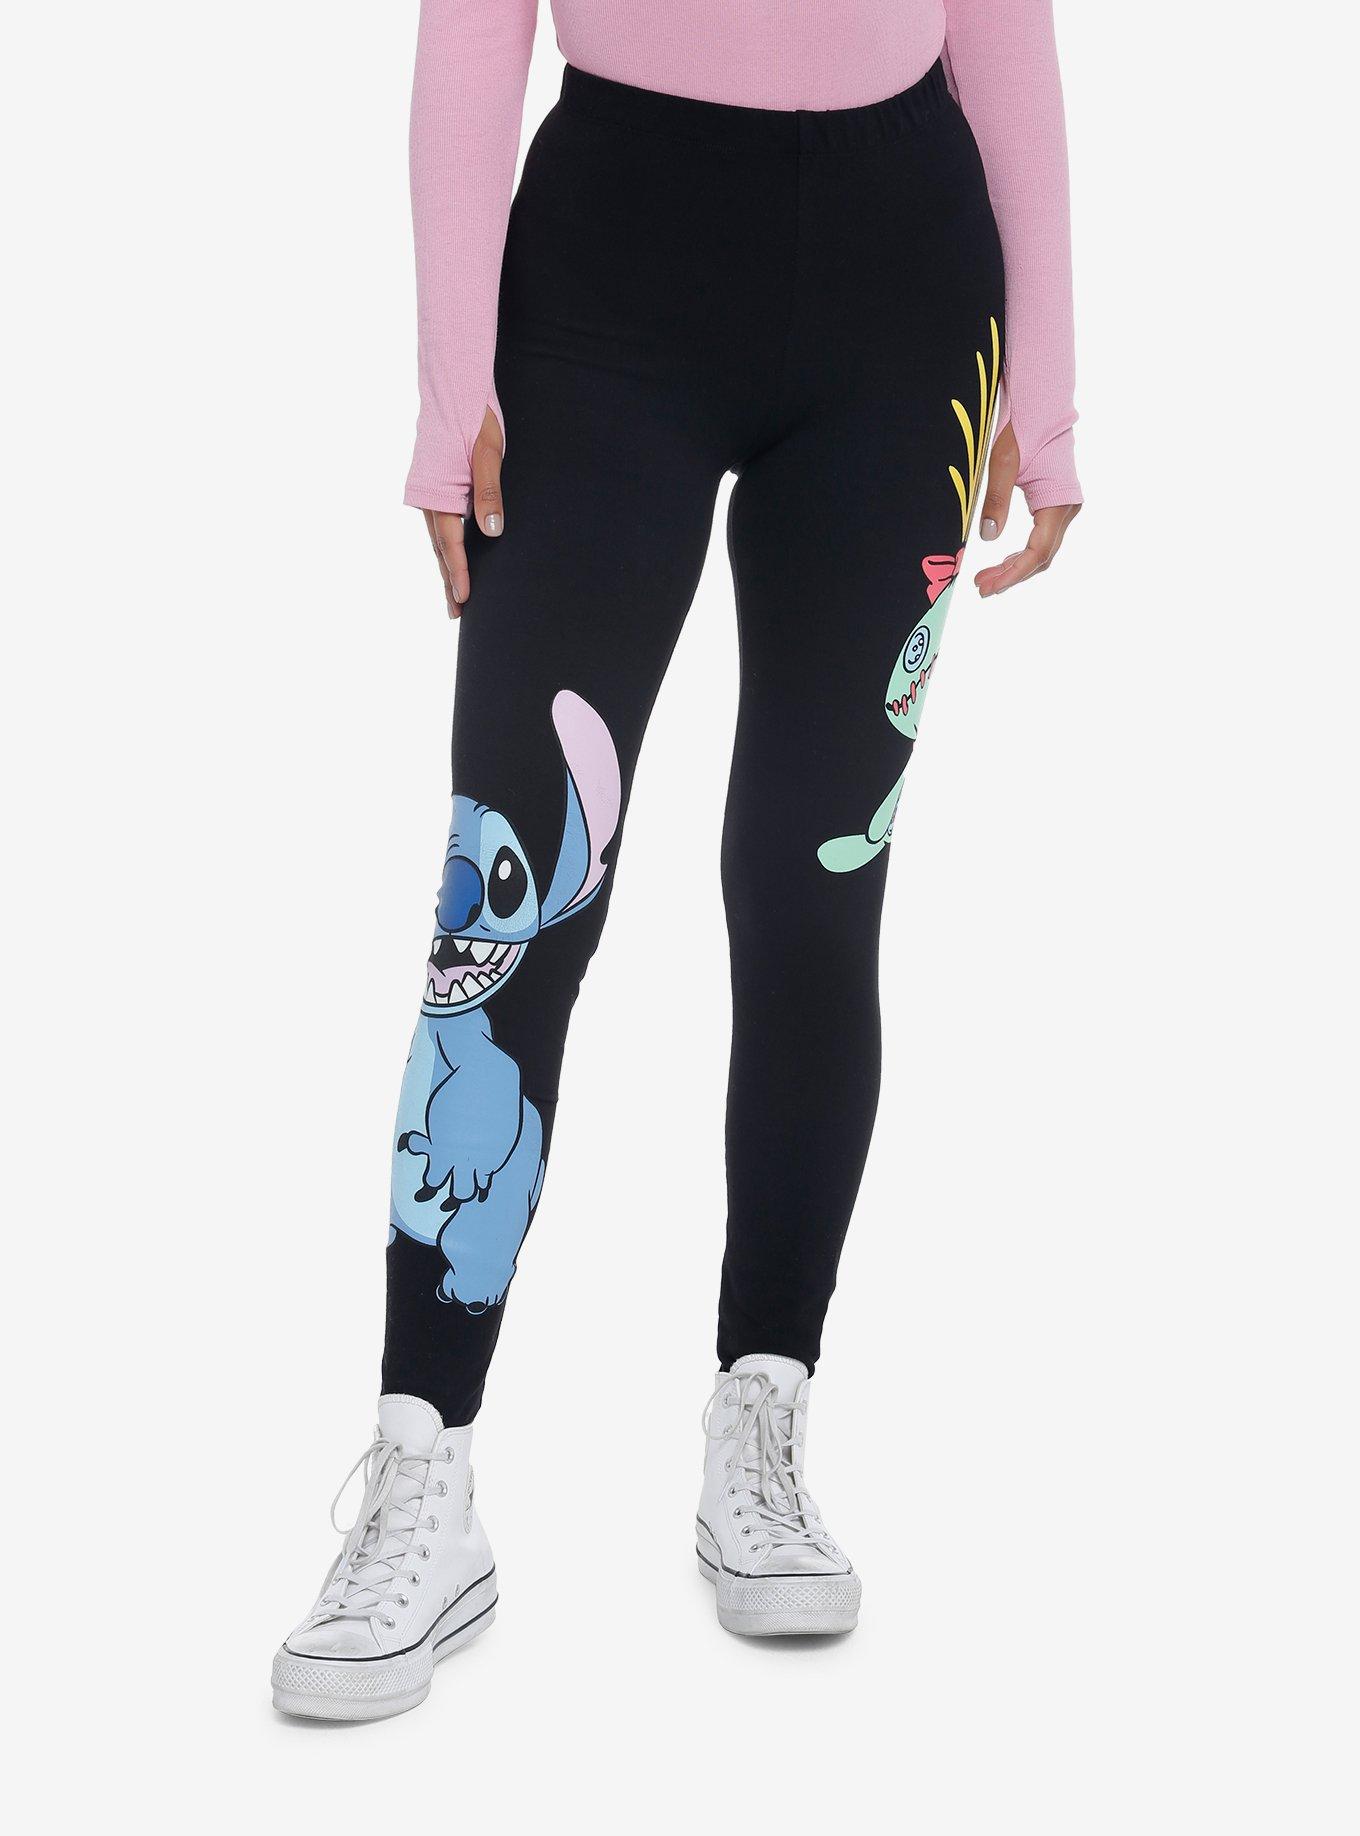 Stitch Girl's leggings, Lilo and Stitch sold by DustinBowker